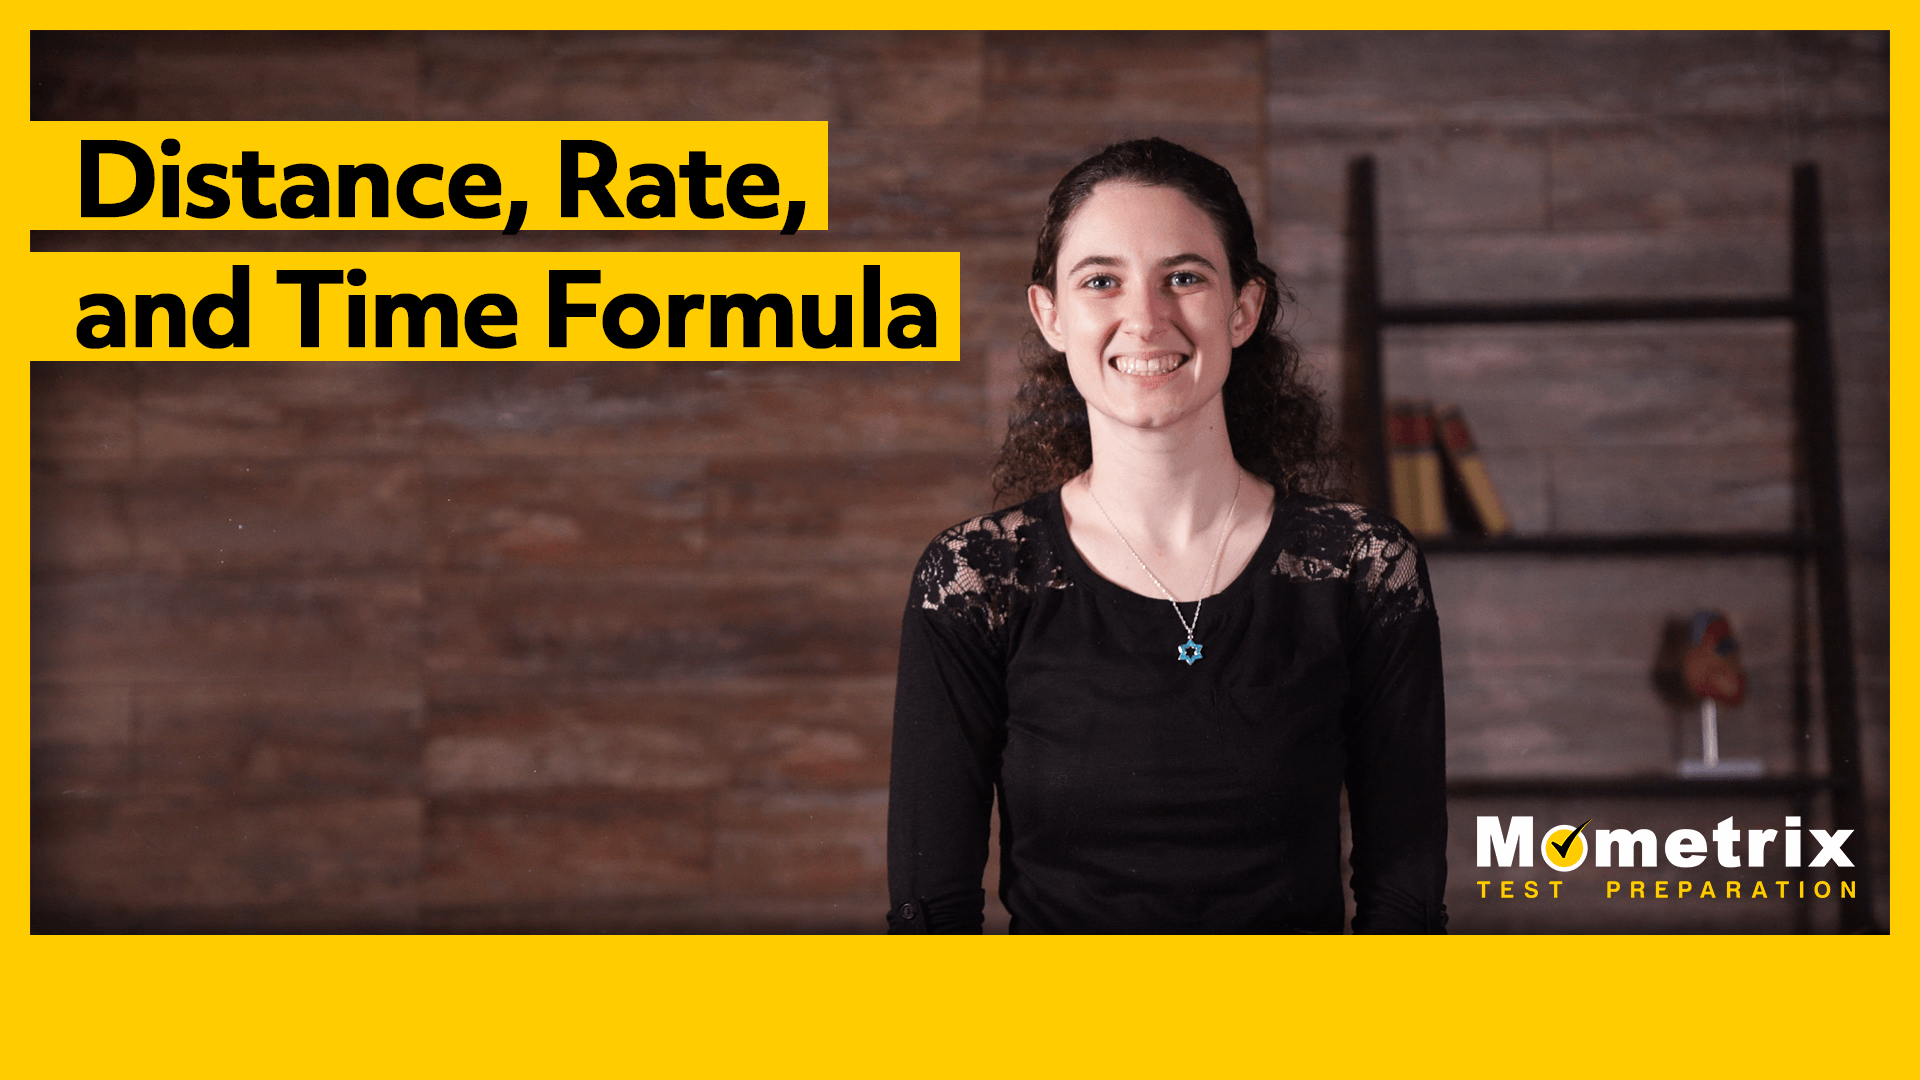 A person stands in front of a background with wooden panels and shelves. Text on the image says, "Distance, Rate, and Time Formula" and "Mometrix Test Preparation.